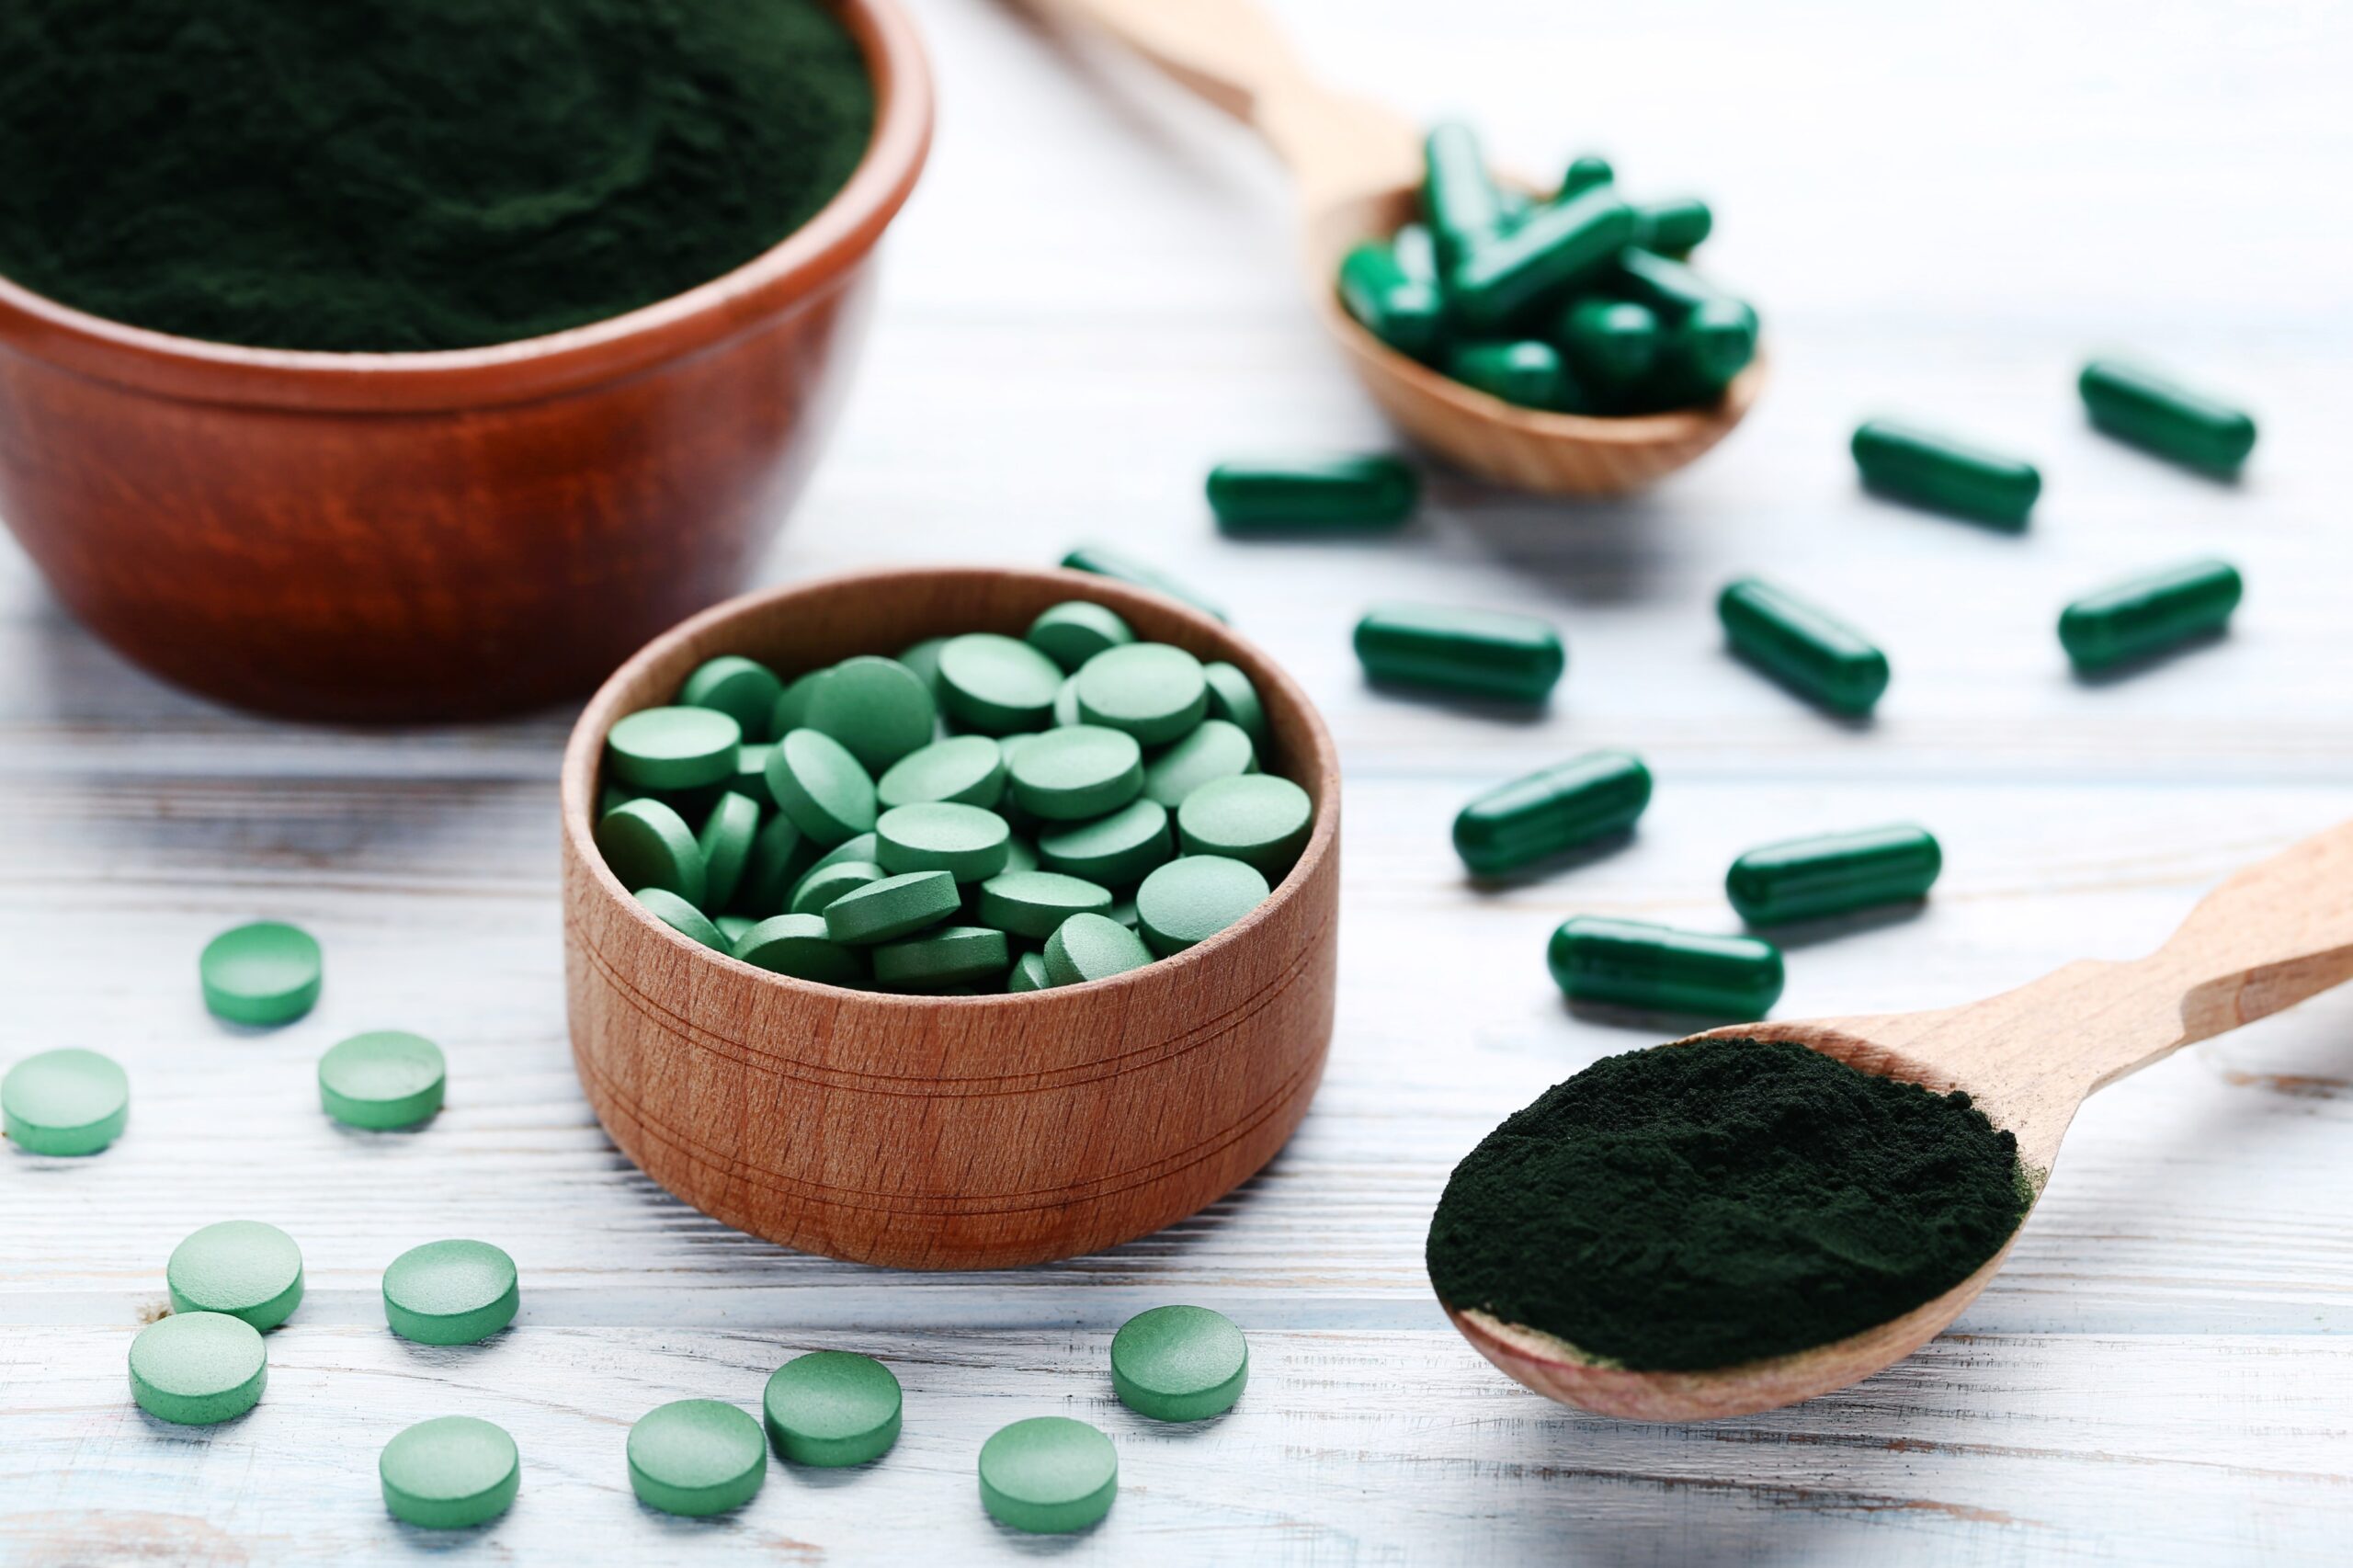 Spirulina Extract May Prevent Increase Of Fat In The Blood